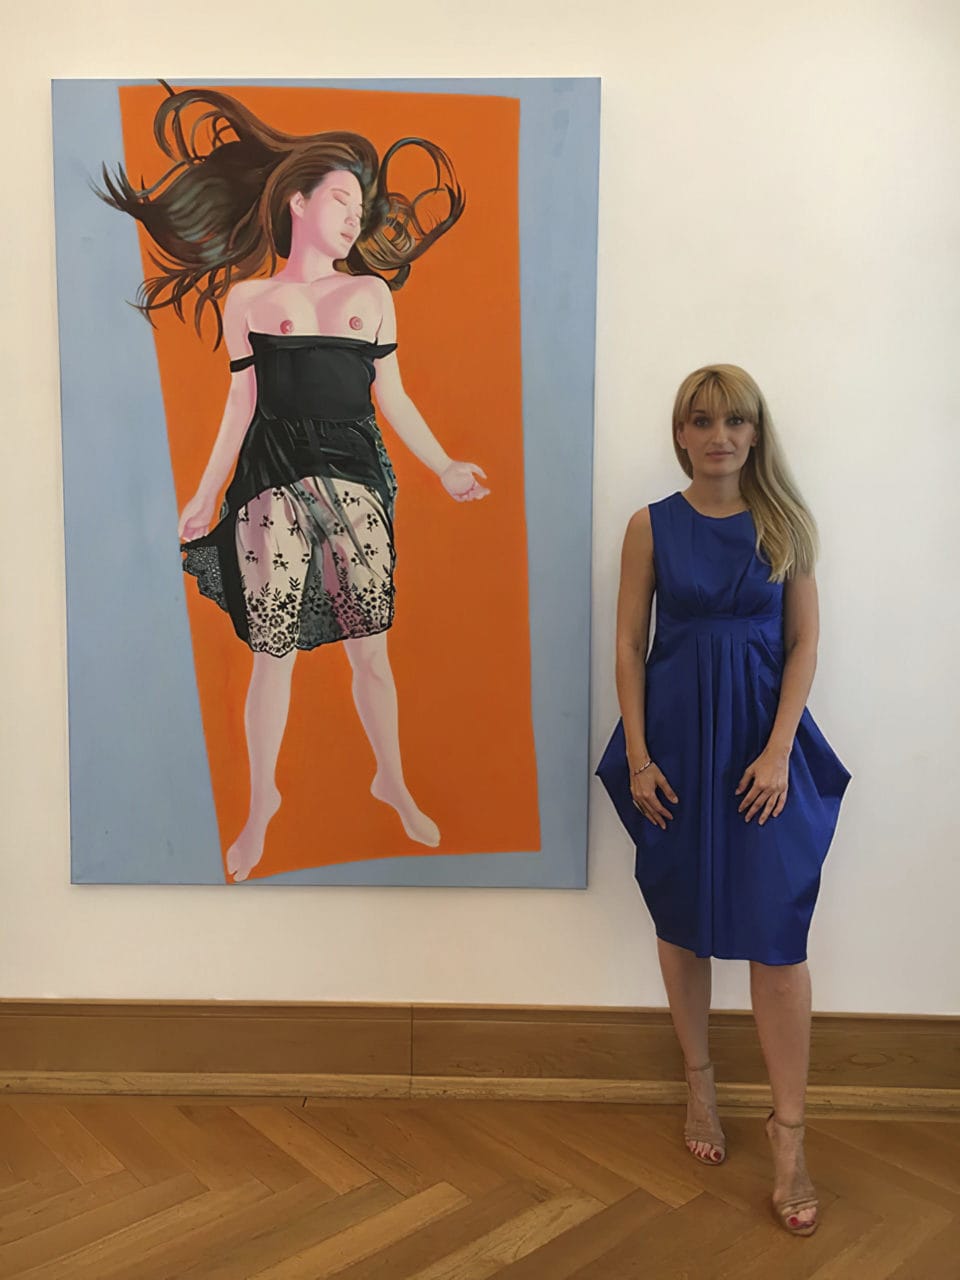 The curator of the exhibition Oana Ionel